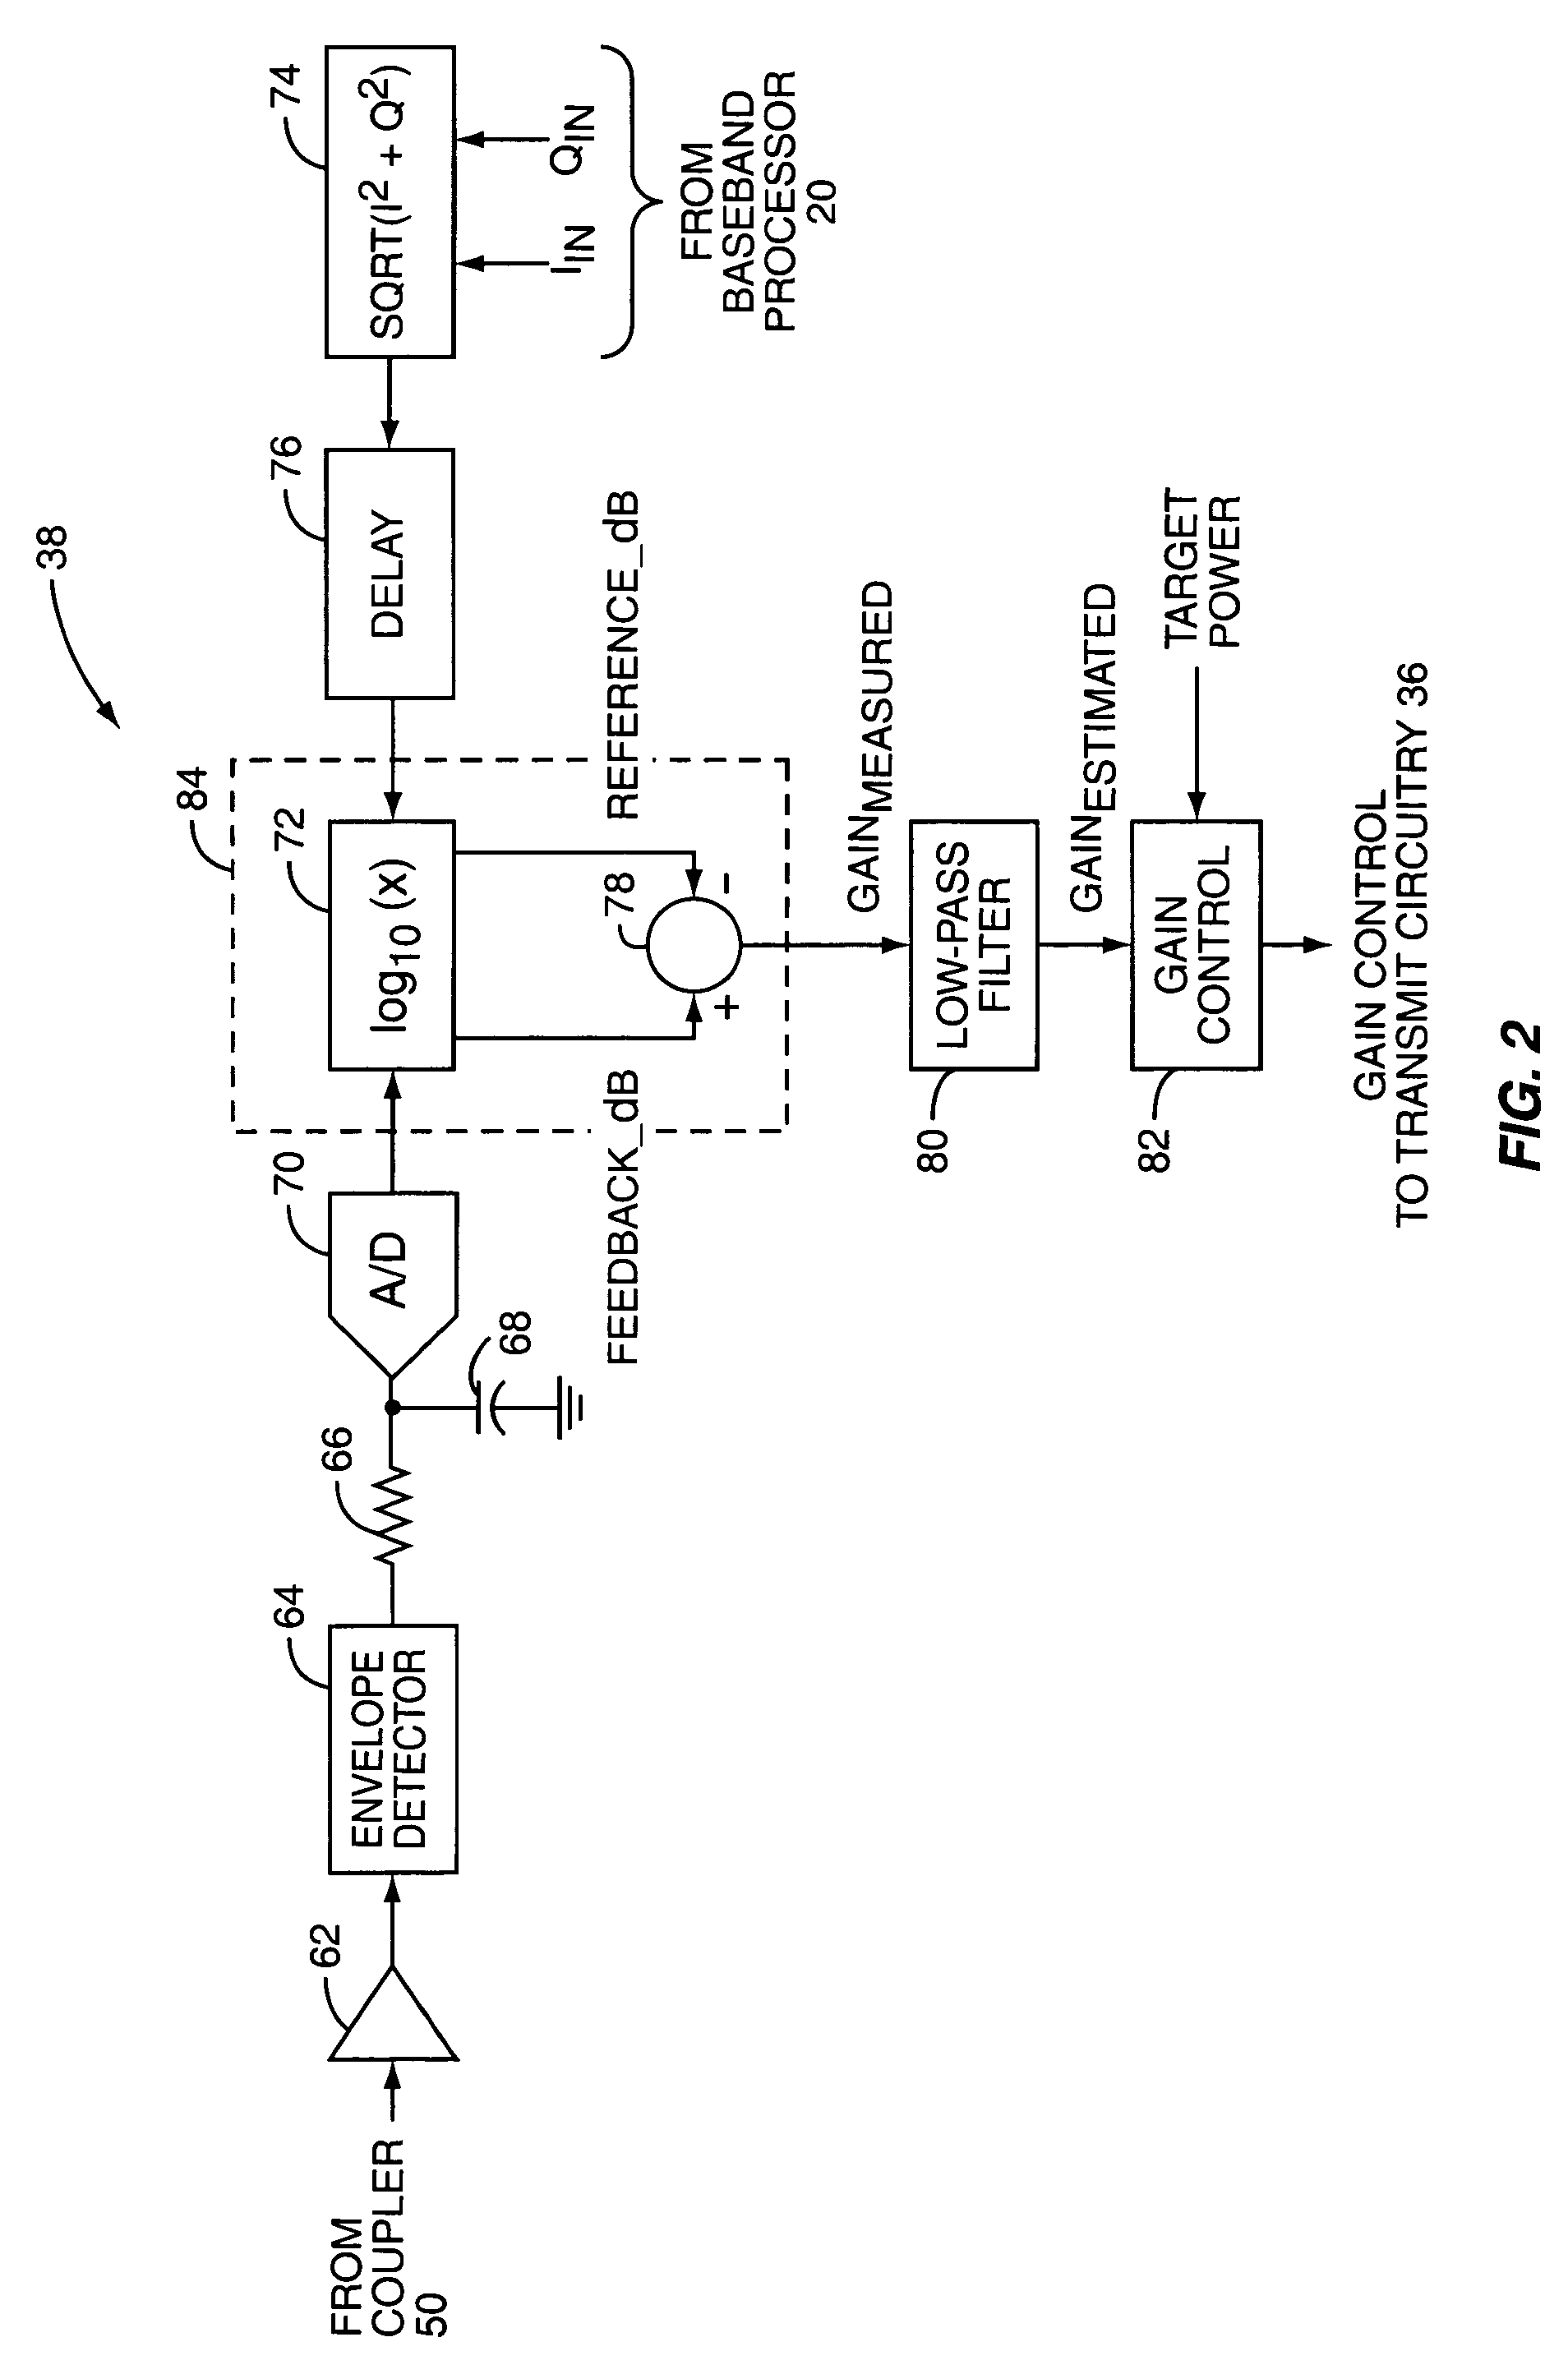 Power control system for a continuous time mobile transmitter